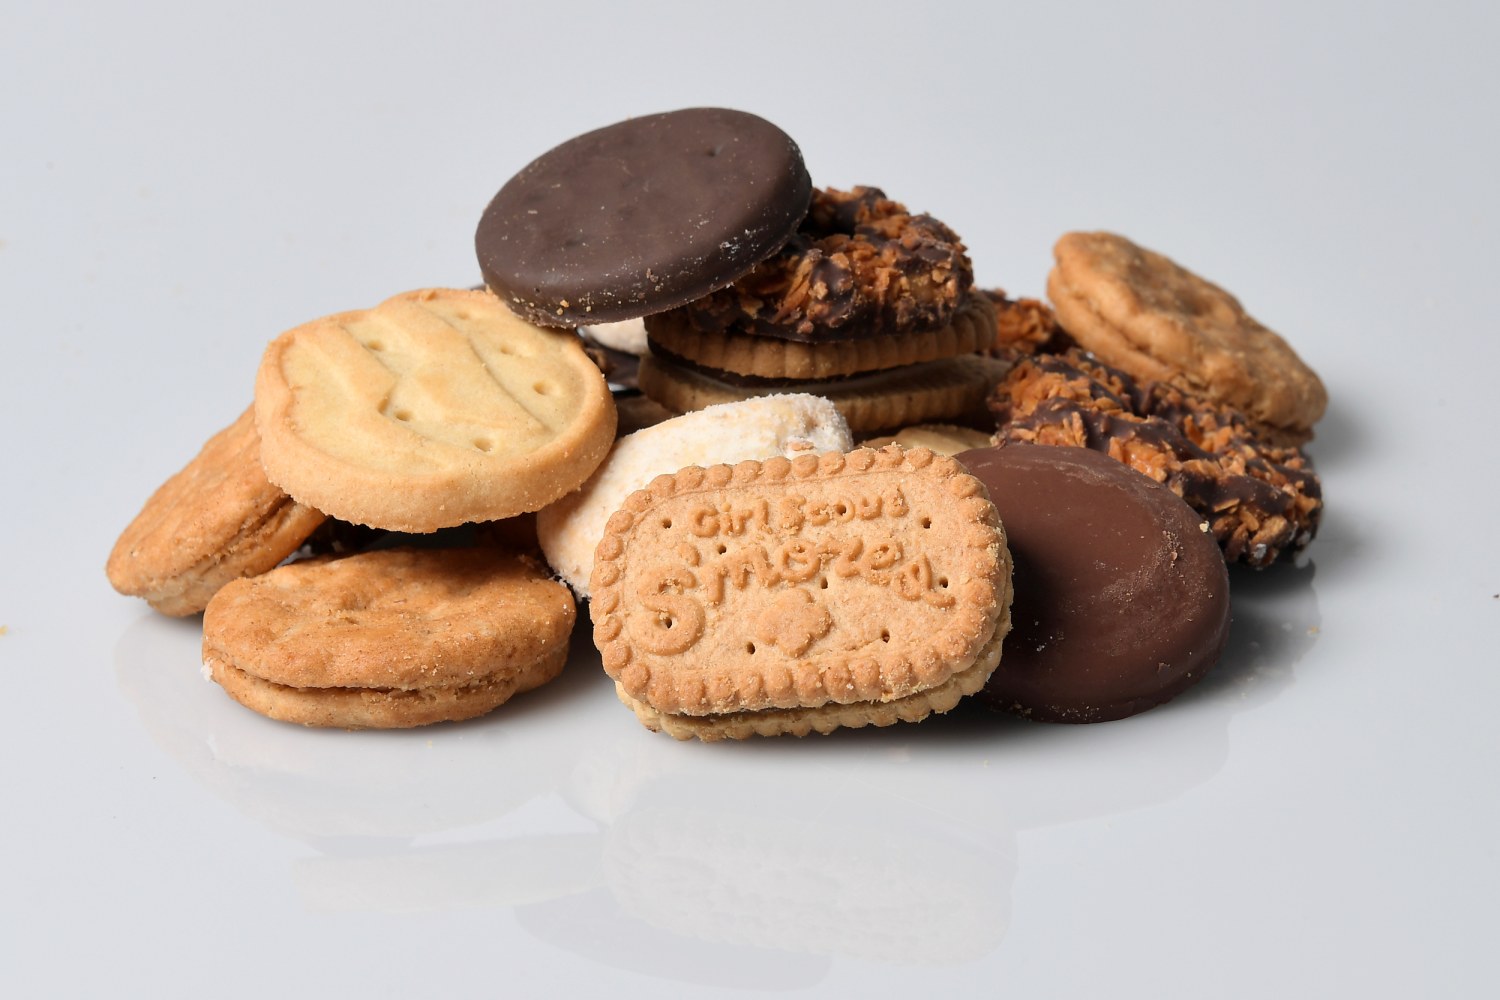 Which Girl Scout cookie is the healthiest?